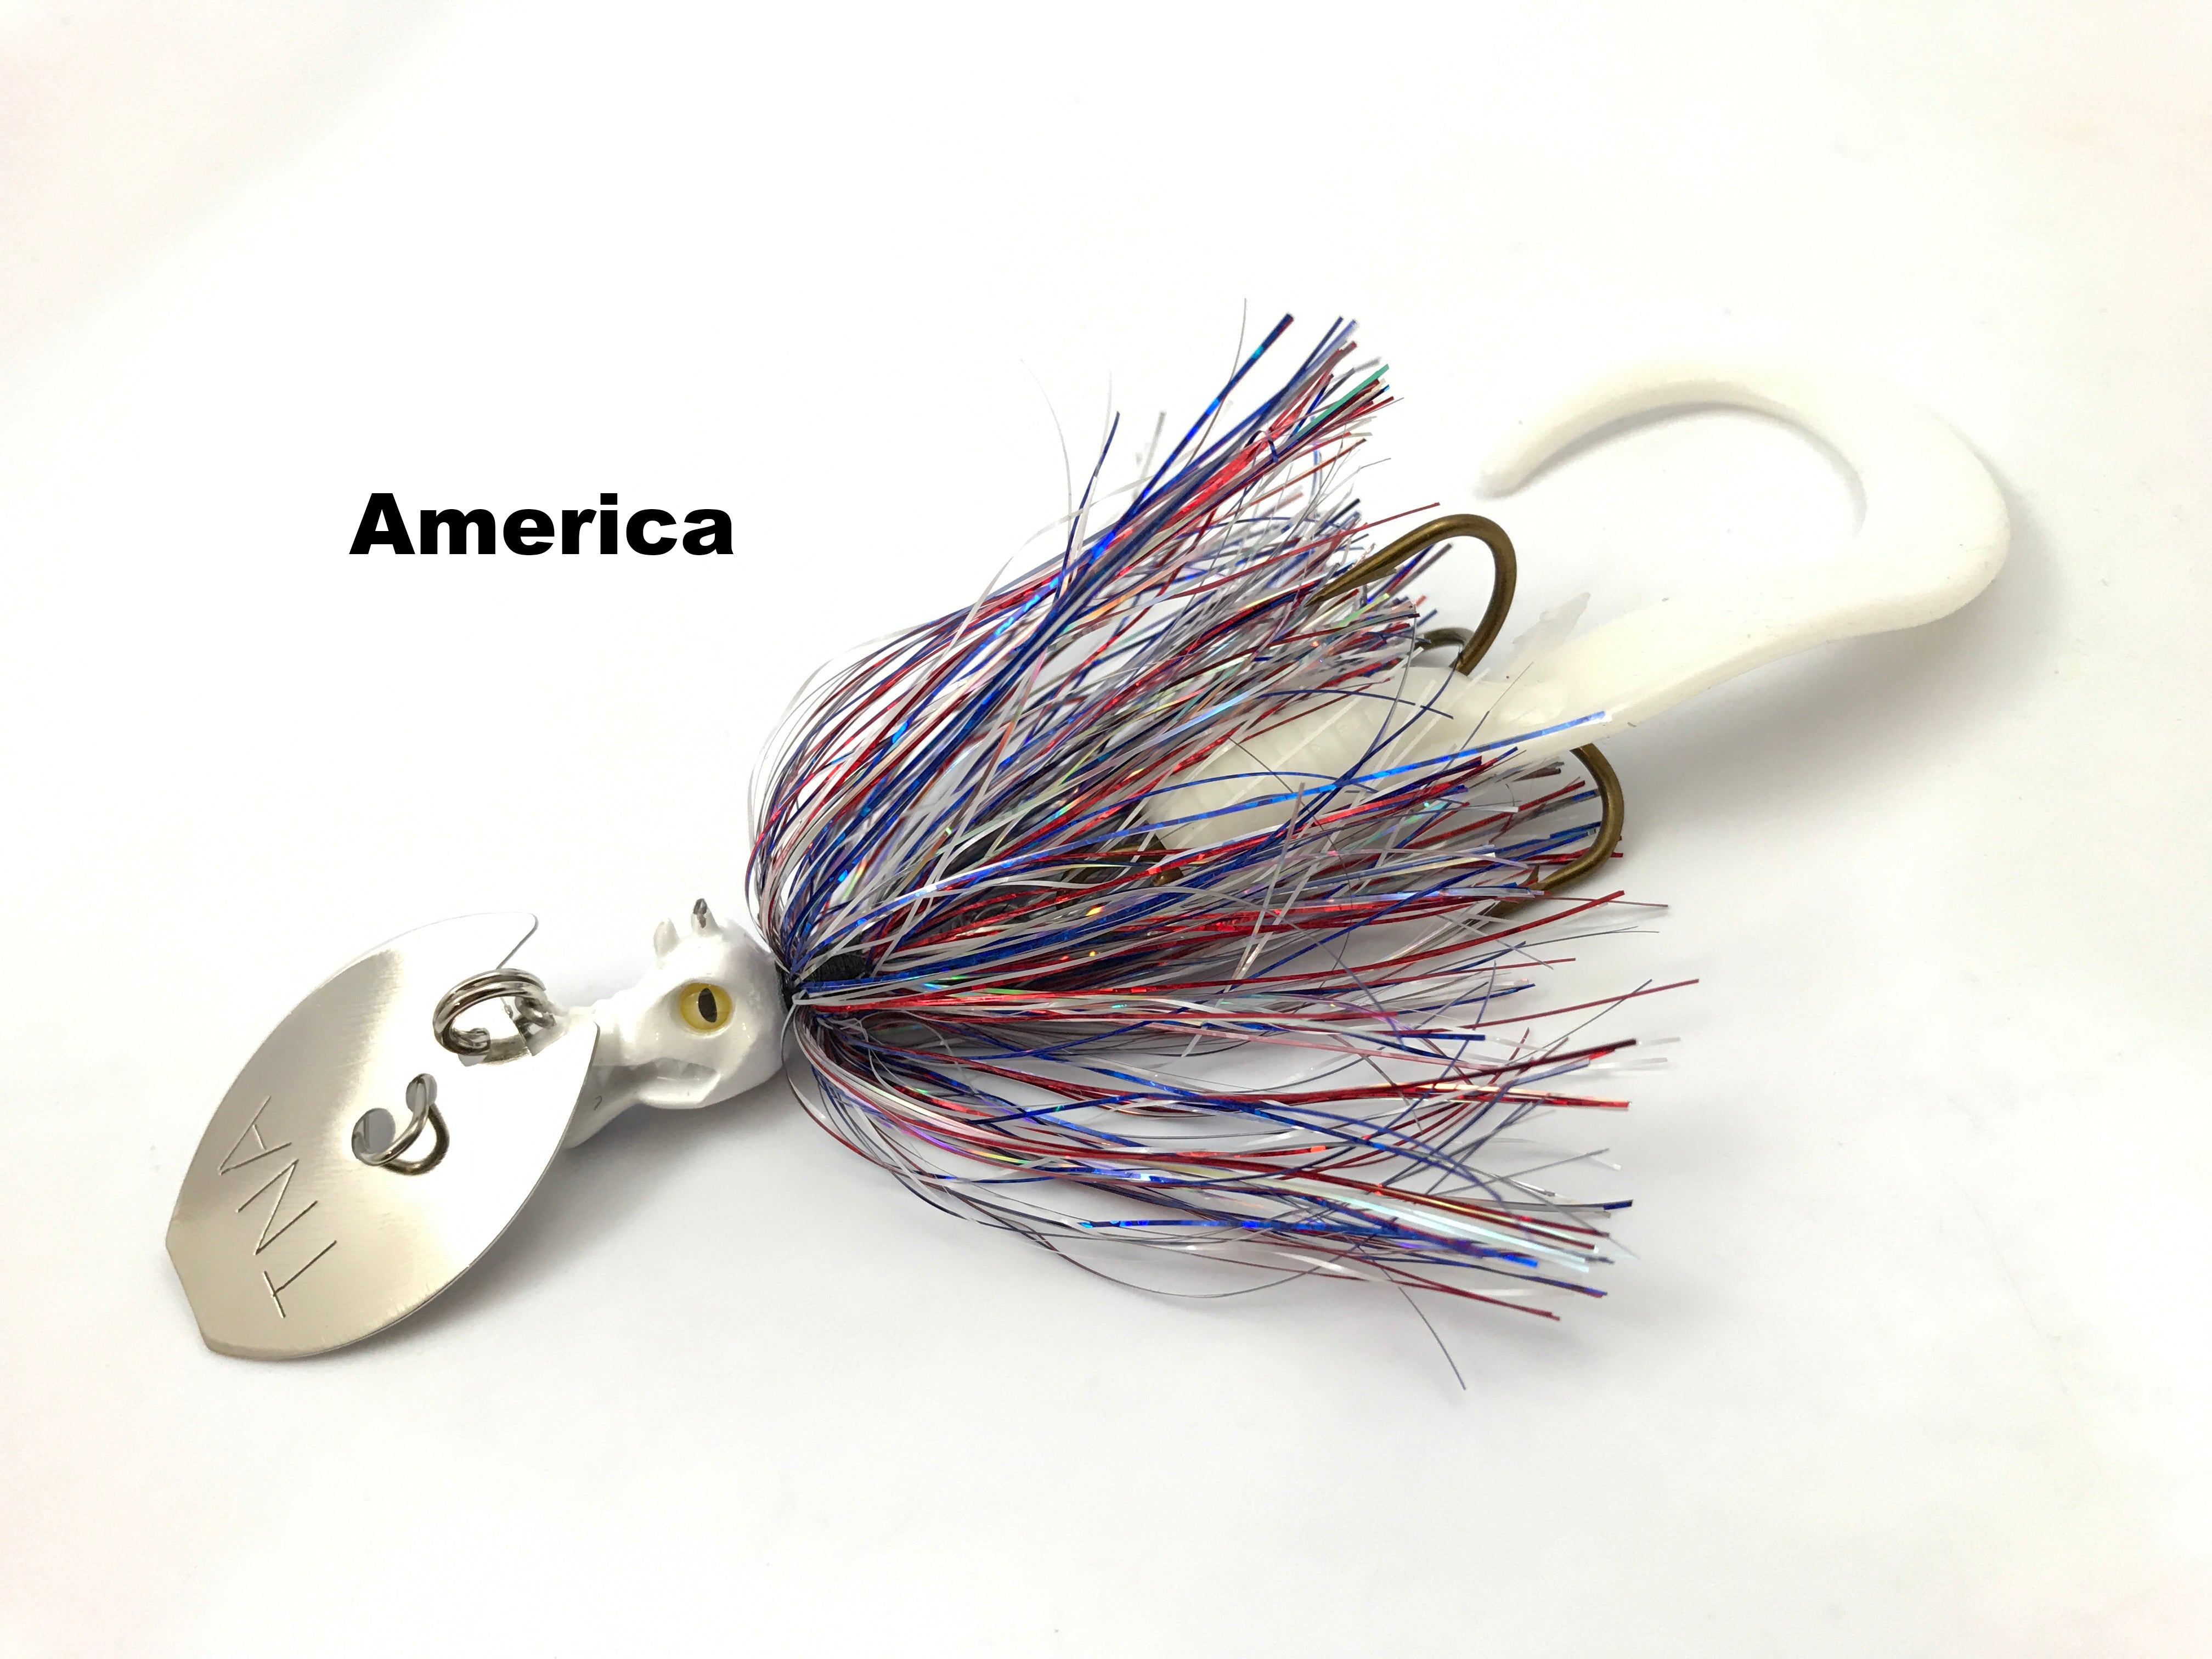 Rage Tackle Natural Colors Squid Jigs